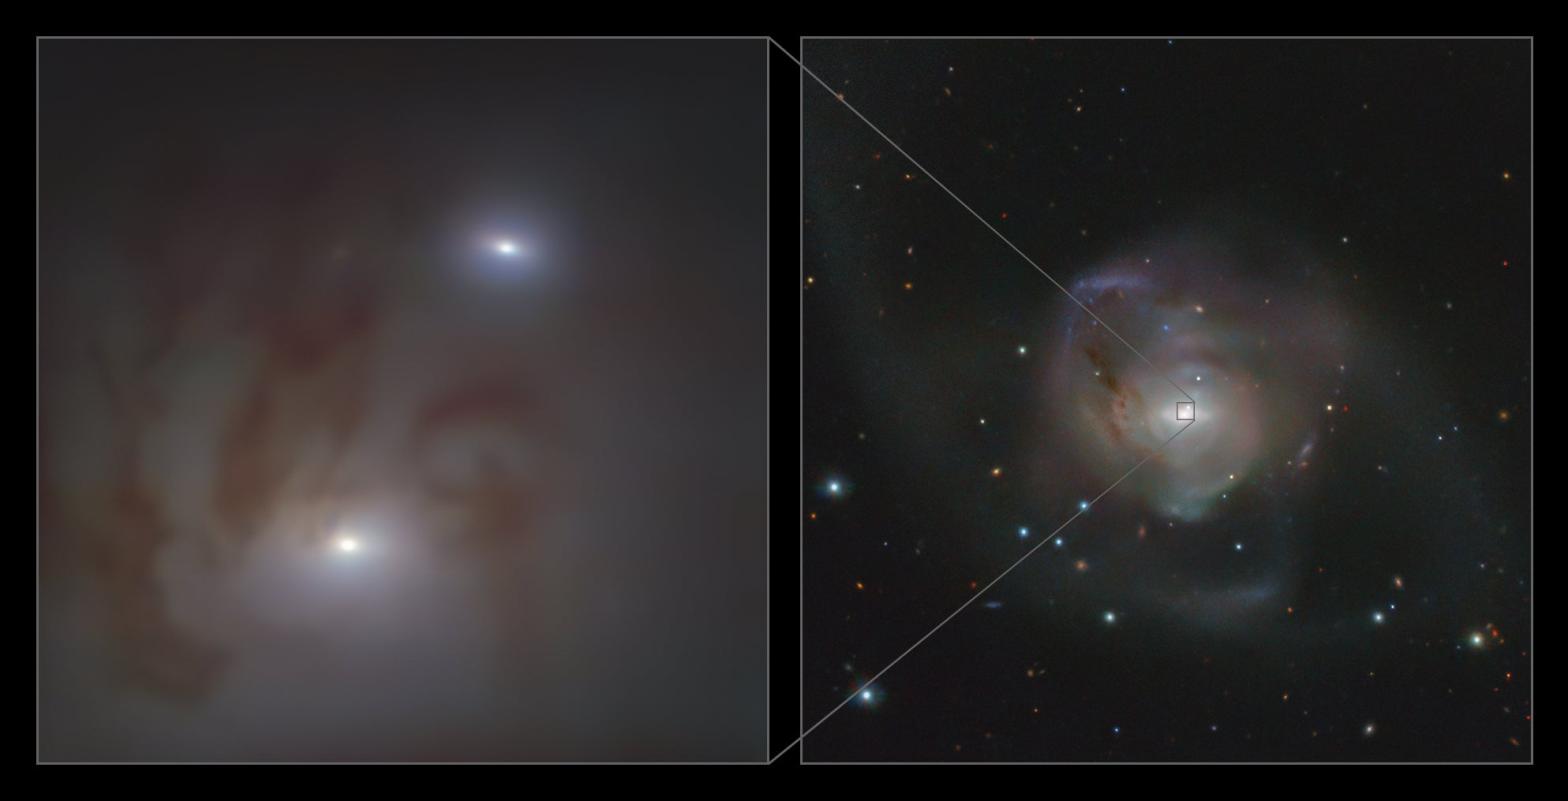 The galaxy NGC 7727 (right) and a zoomed-in view (left) showing the two galactic nuclei that contain the supermassive black holes.